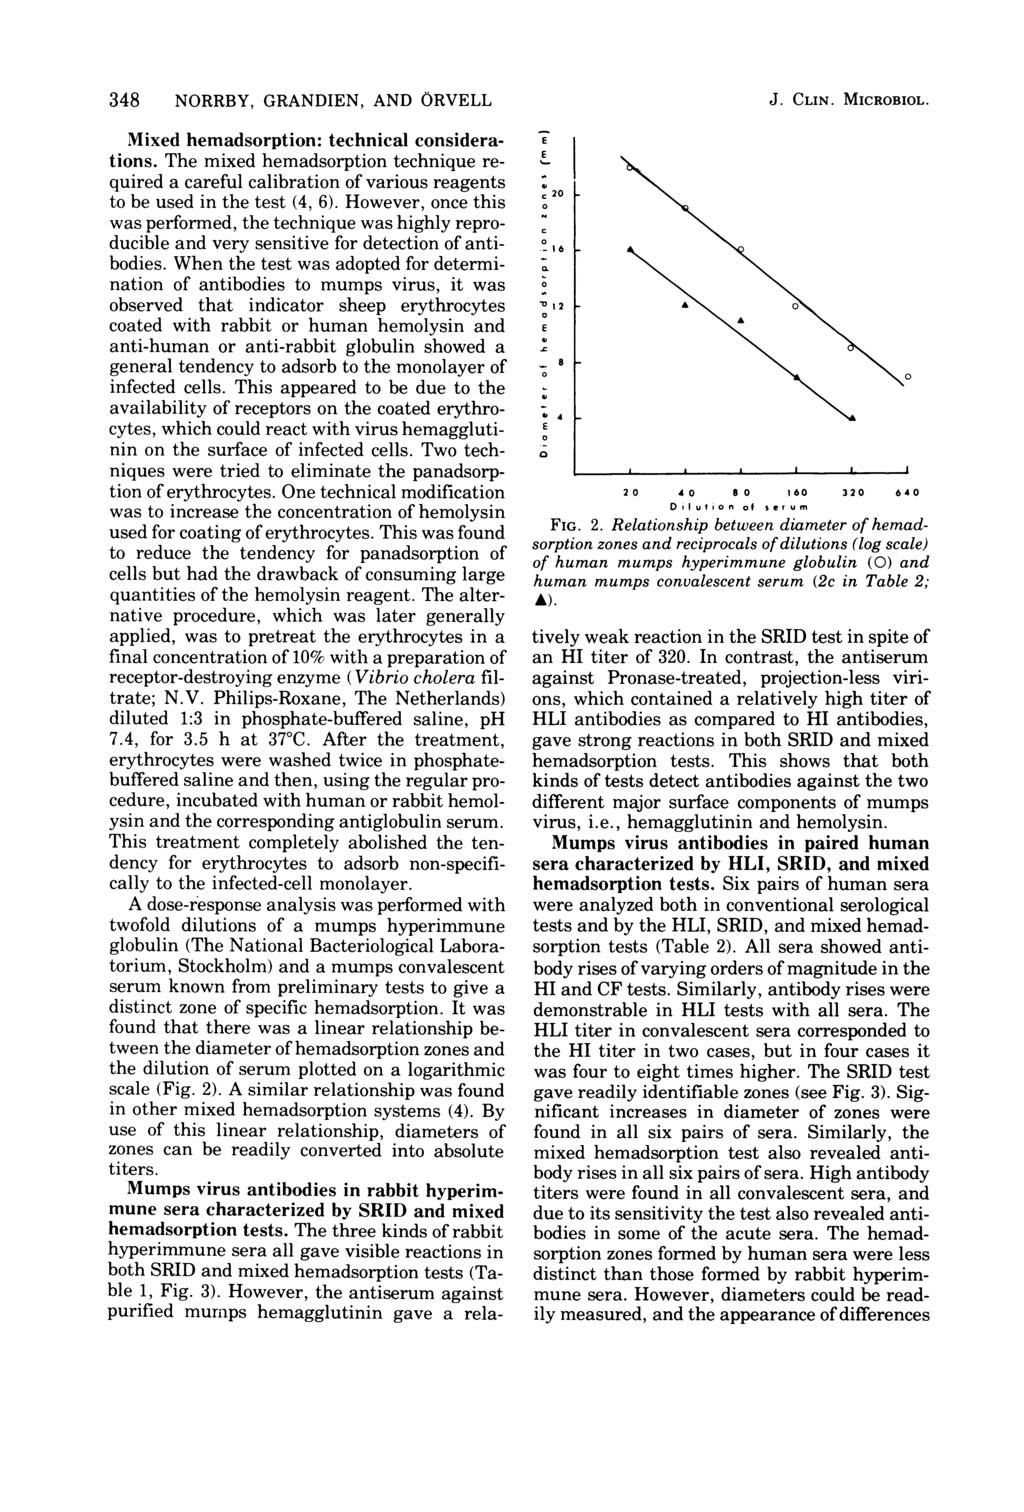 348 NORRBY, GRANDIEN, AND ORVELL Mixed hemadsorption: technical considerations. The mixed hemadsorption technique required a careful calibration of various reagents to be used in the test (4, 6).